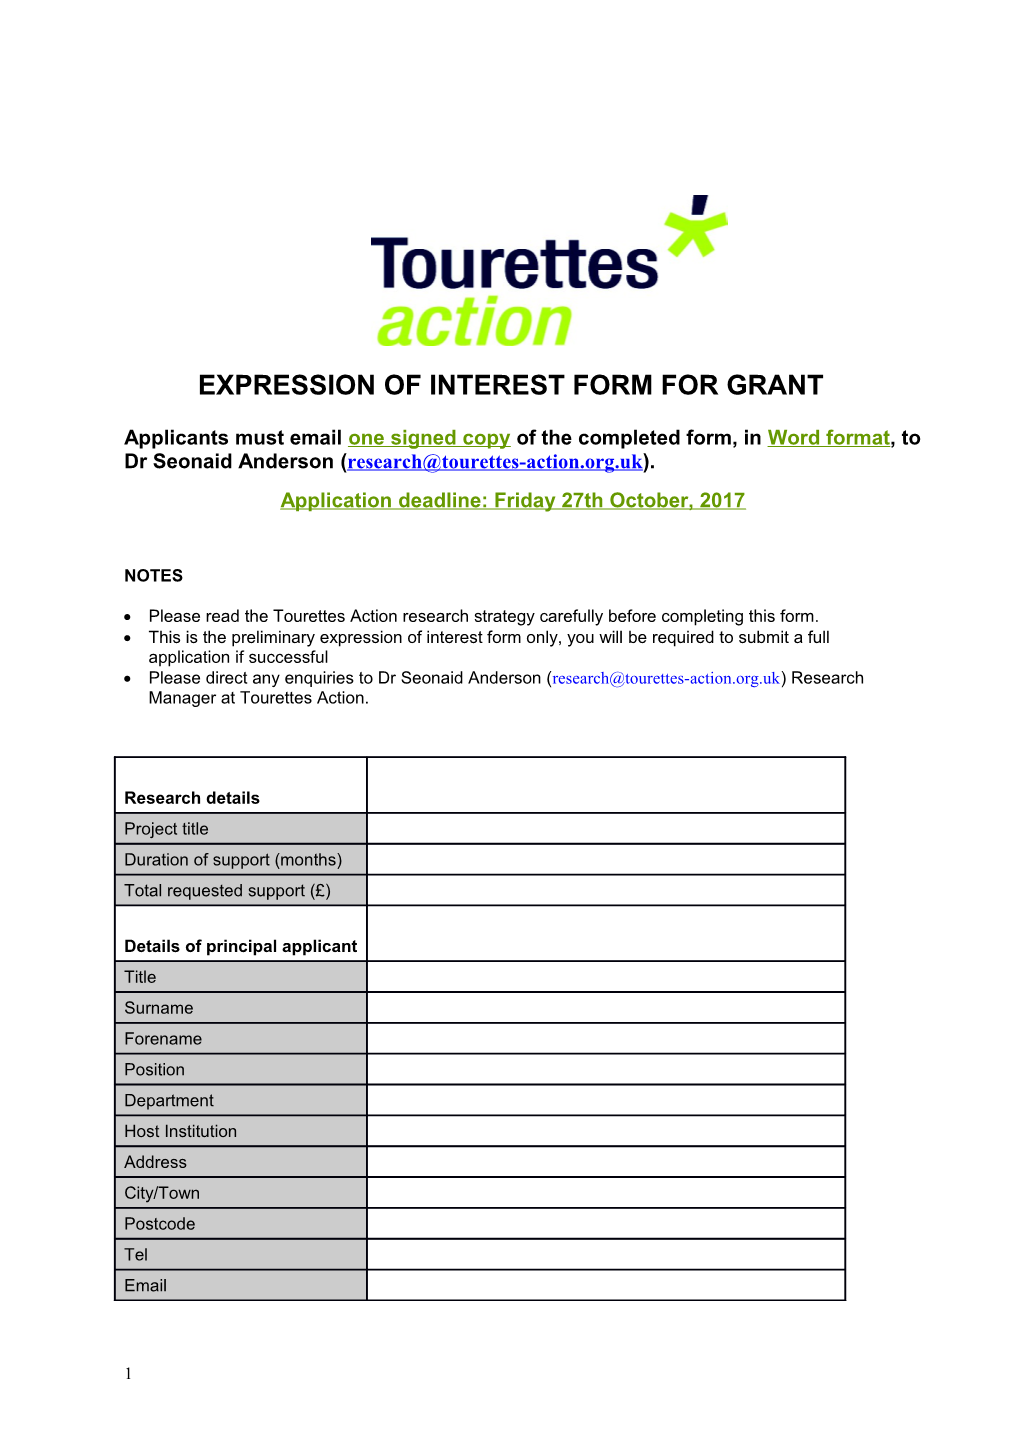 Expression of Interest Form for Grant